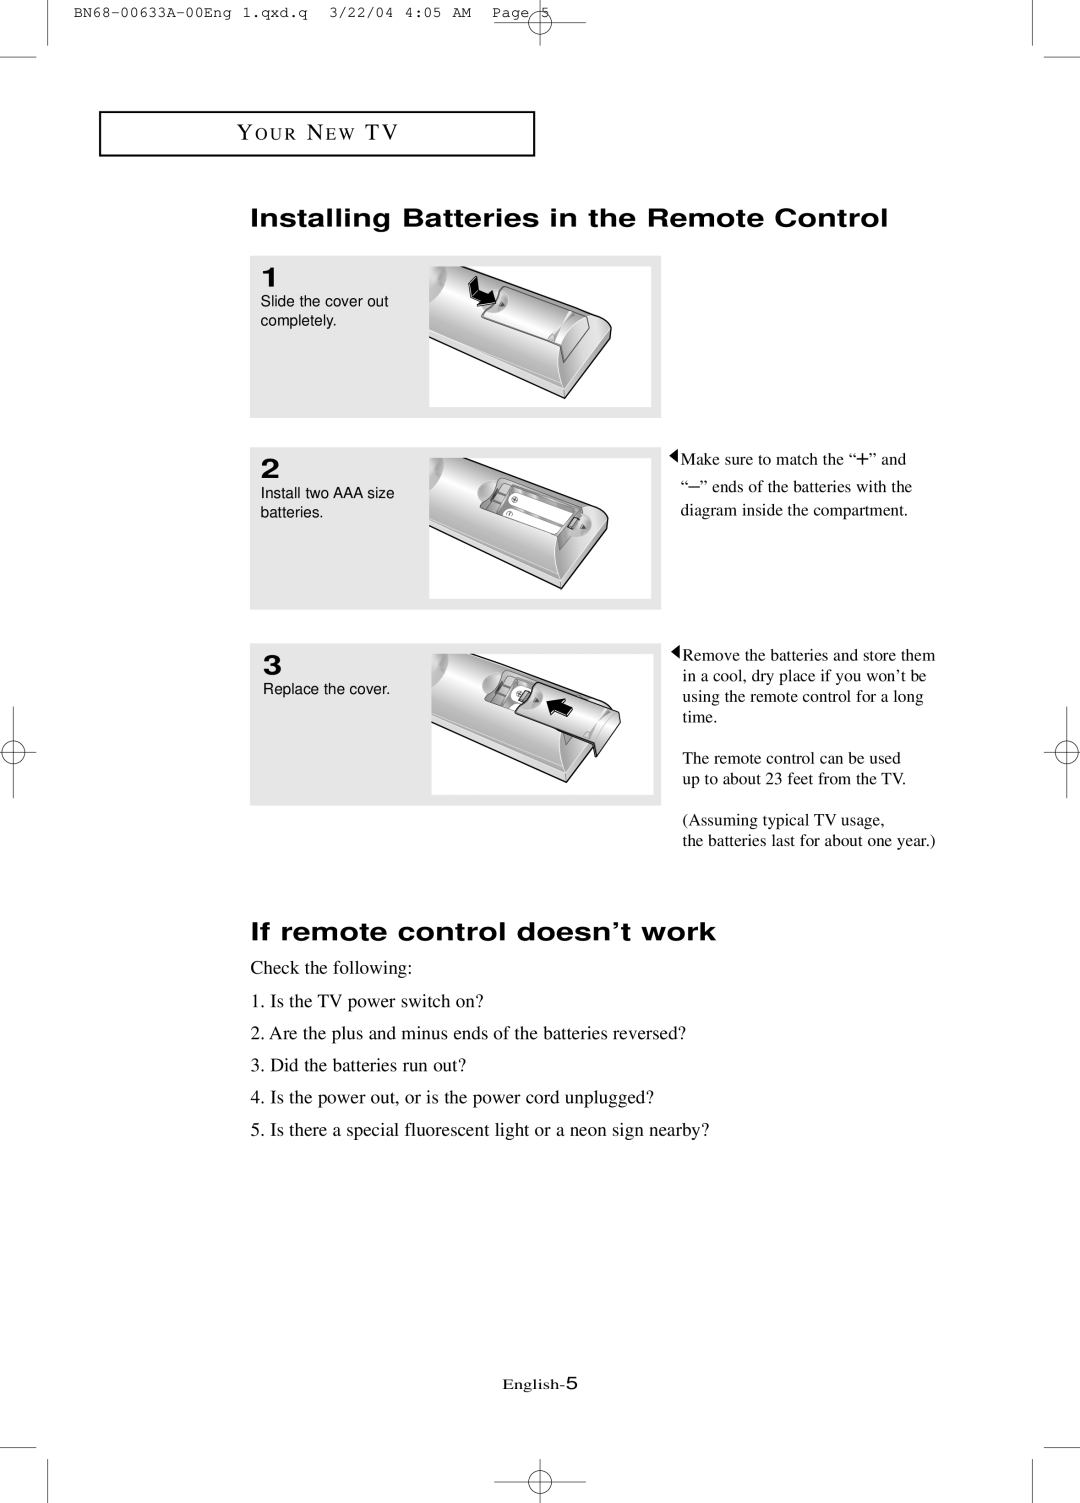 Samsung LT-P 2045, LT-P 1745, LT-P 1545 manual Installing Batteries in the Remote Control, If remote control doesn’t work 